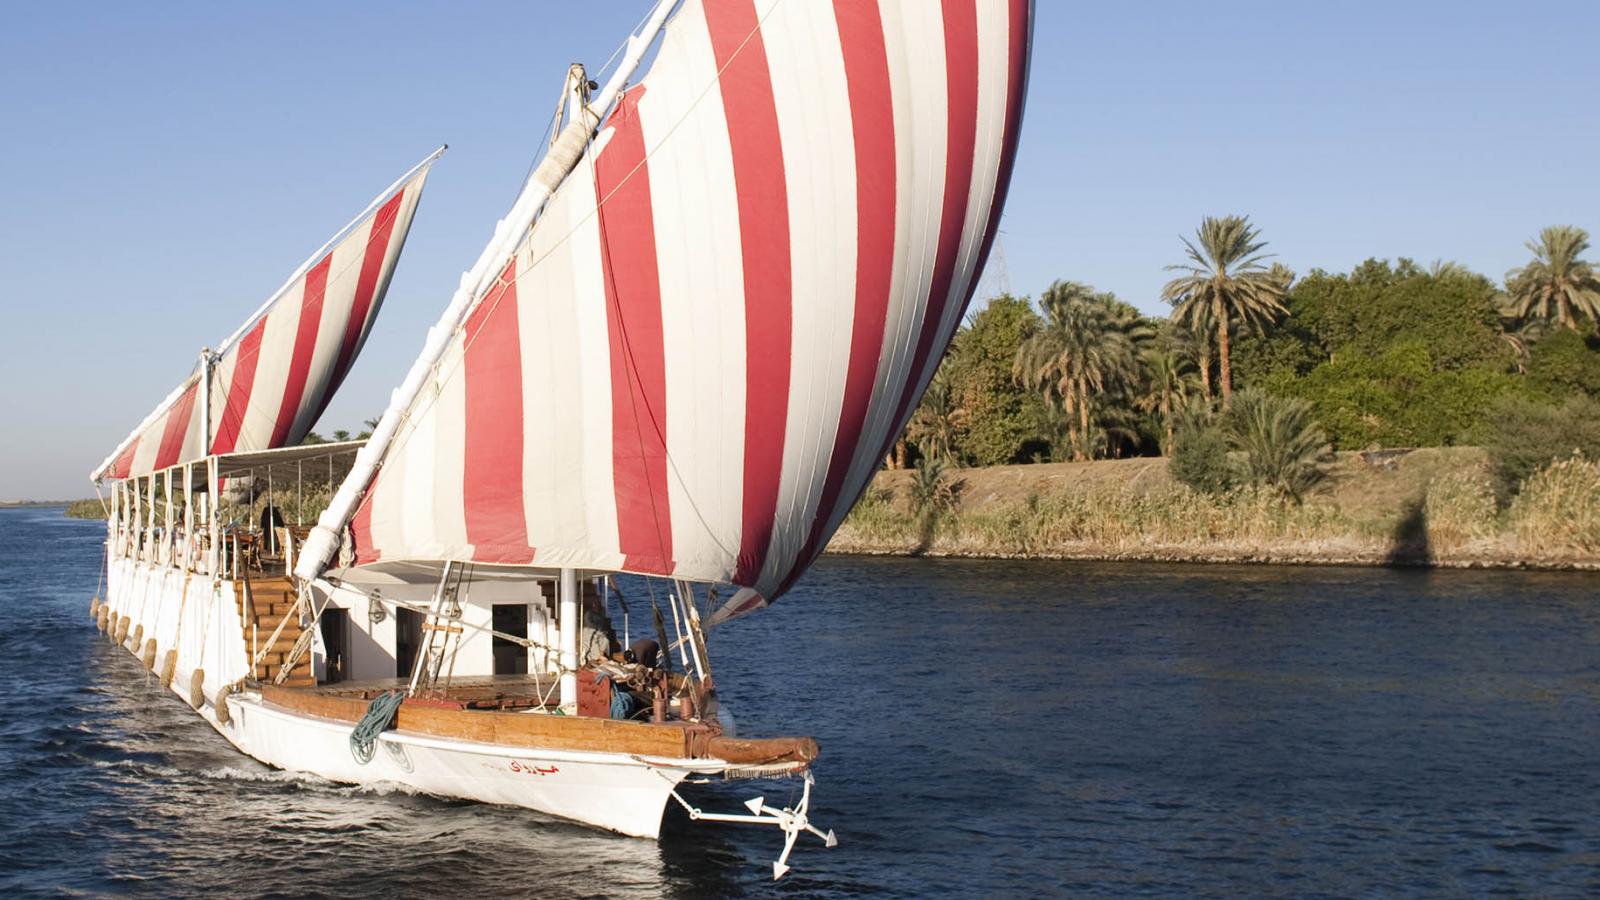 All you need to know about cruising the Egyptian Nile